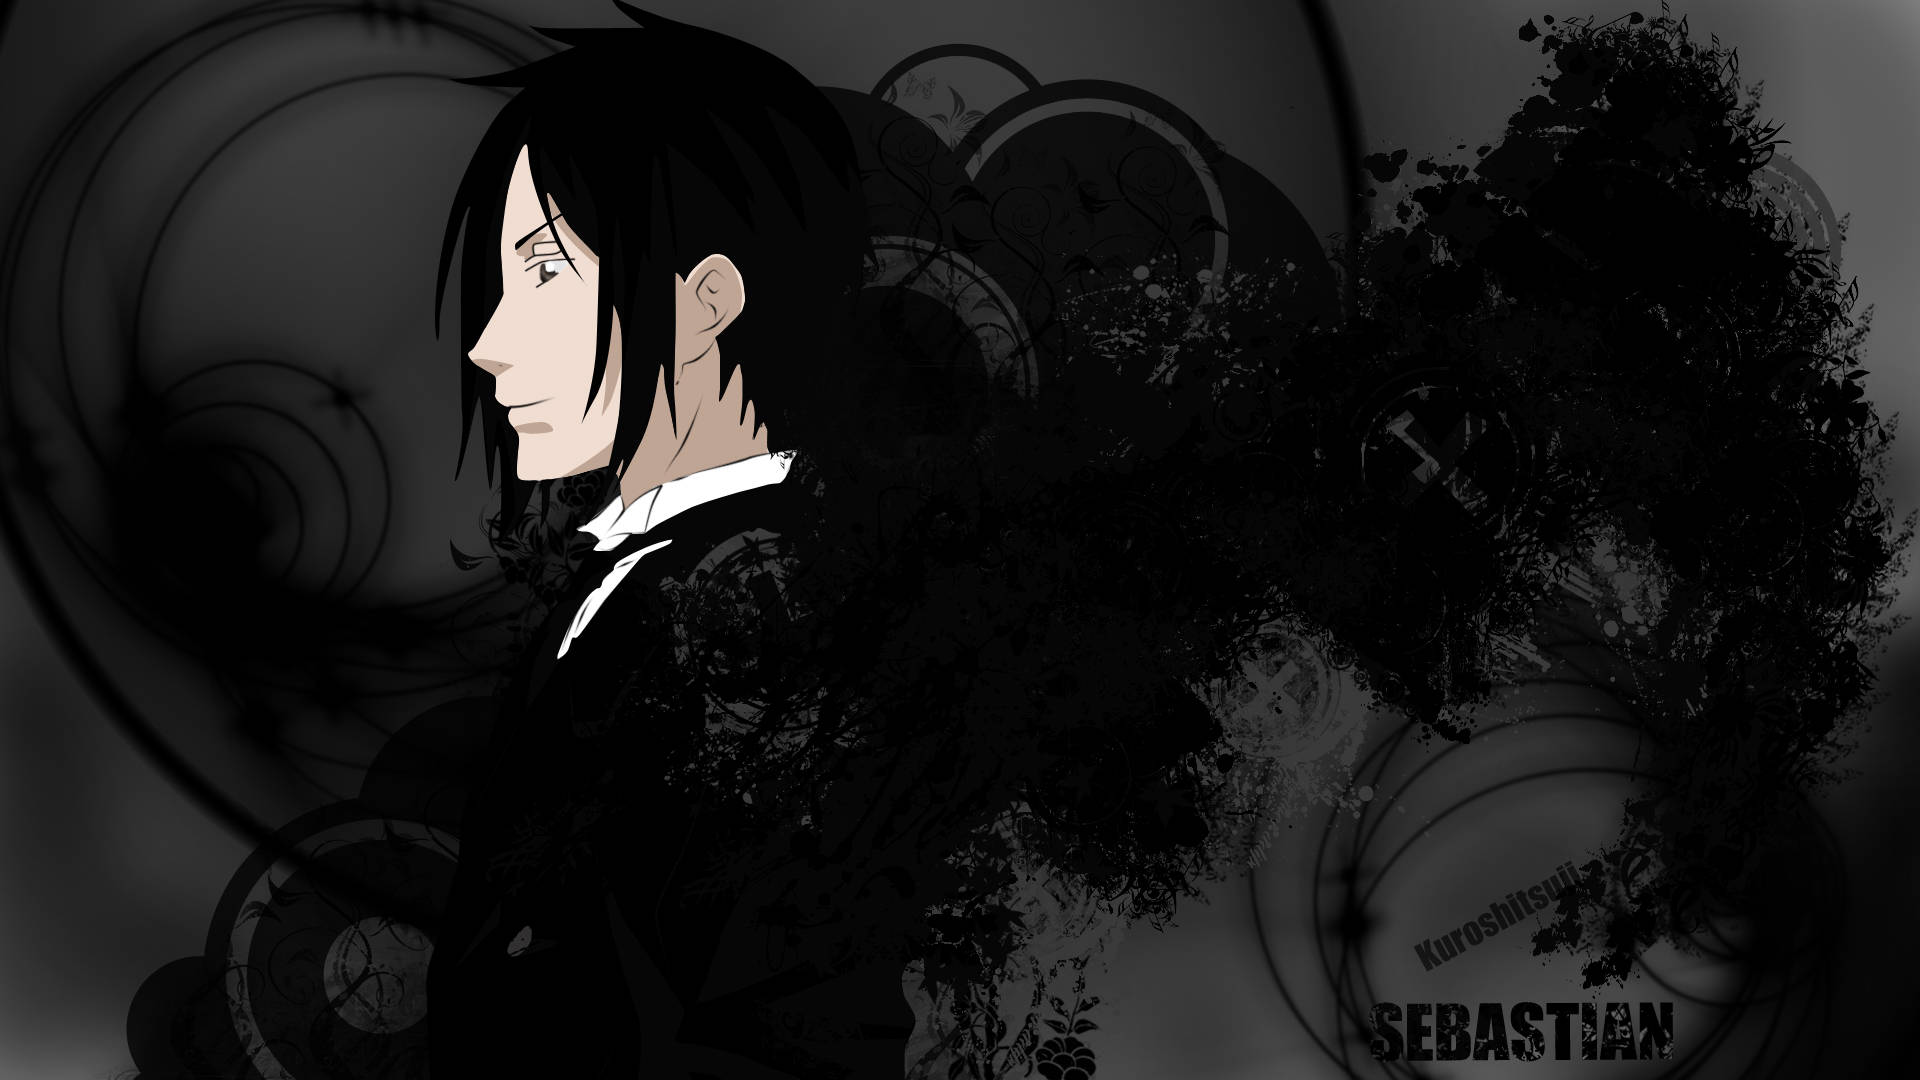 1920X1080 Black Butler Wallpaper and Background